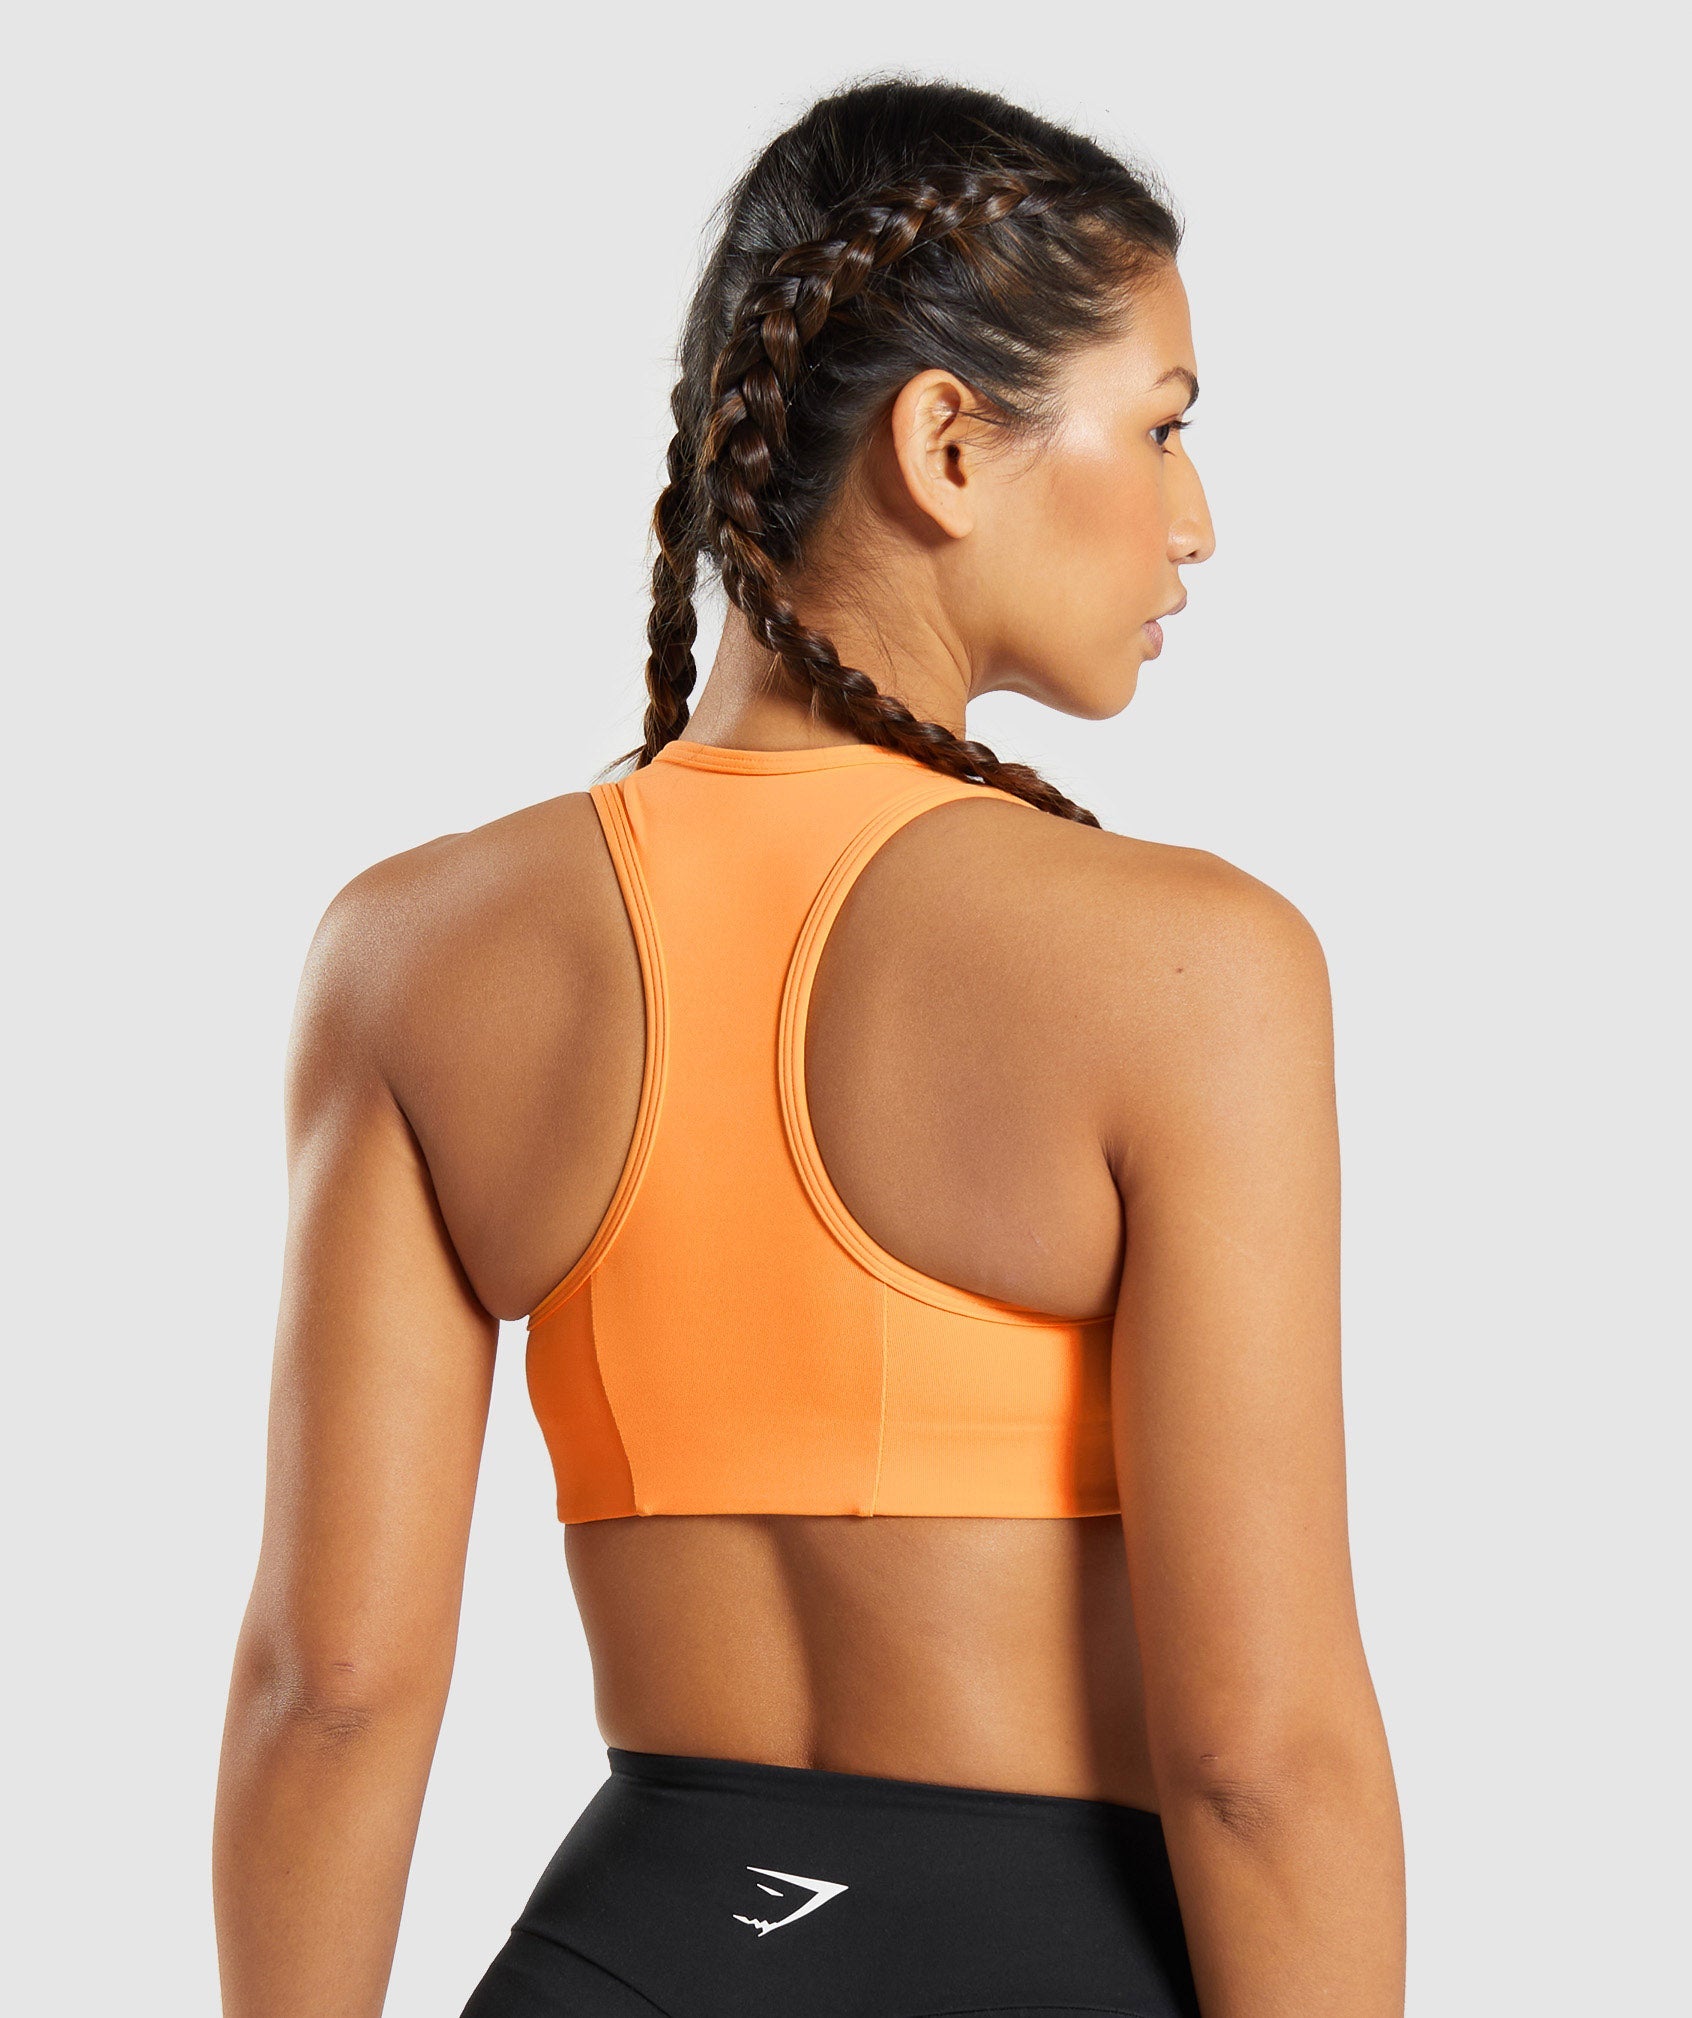 Essential Racer Back Sports Bra in Apricot Orange - view 2